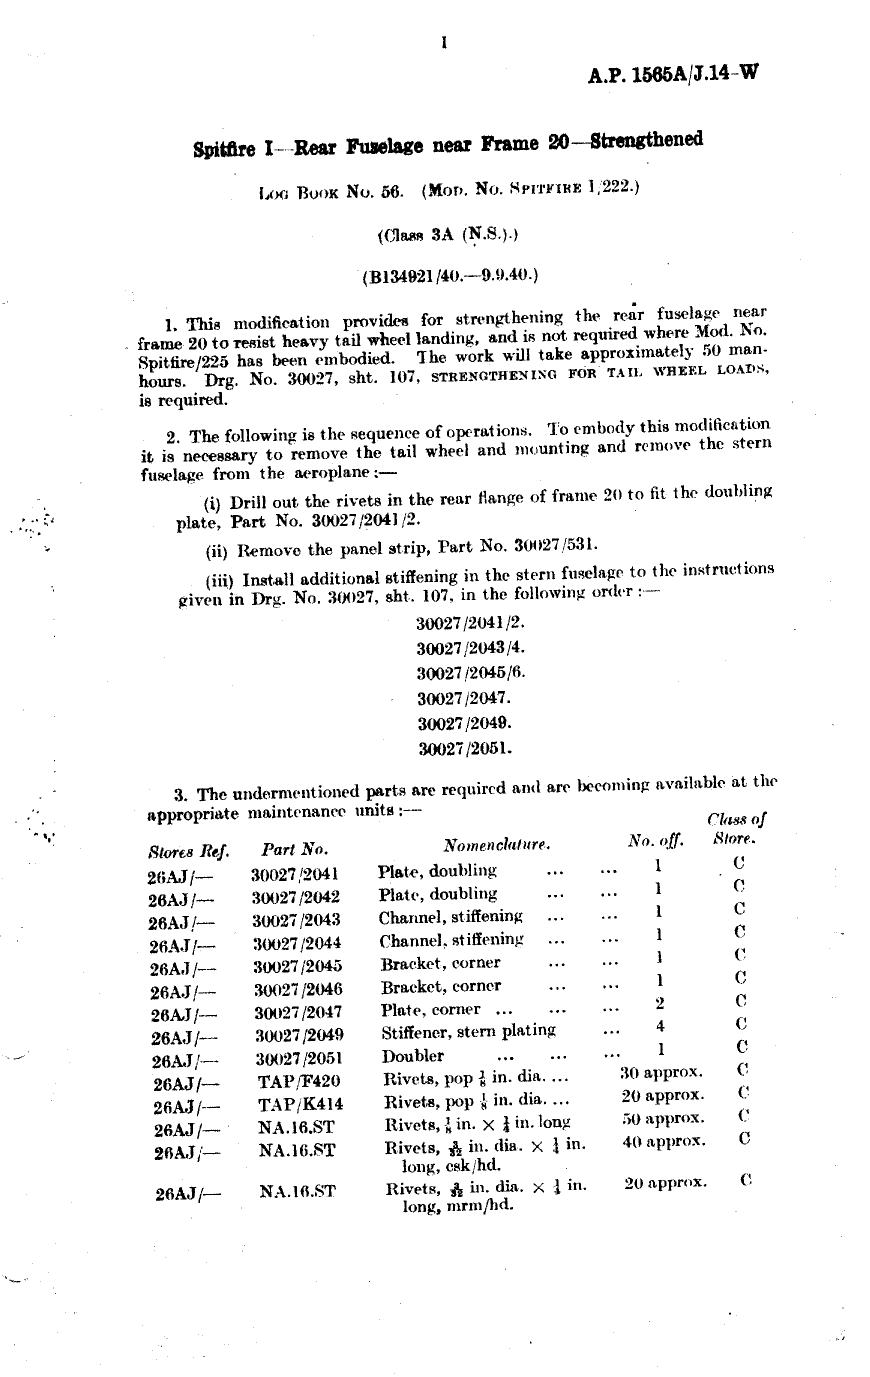 Sample page 1 from AirCorps Library document: Spitfire I Rear Fuselage Near Frame 20 Strengthened